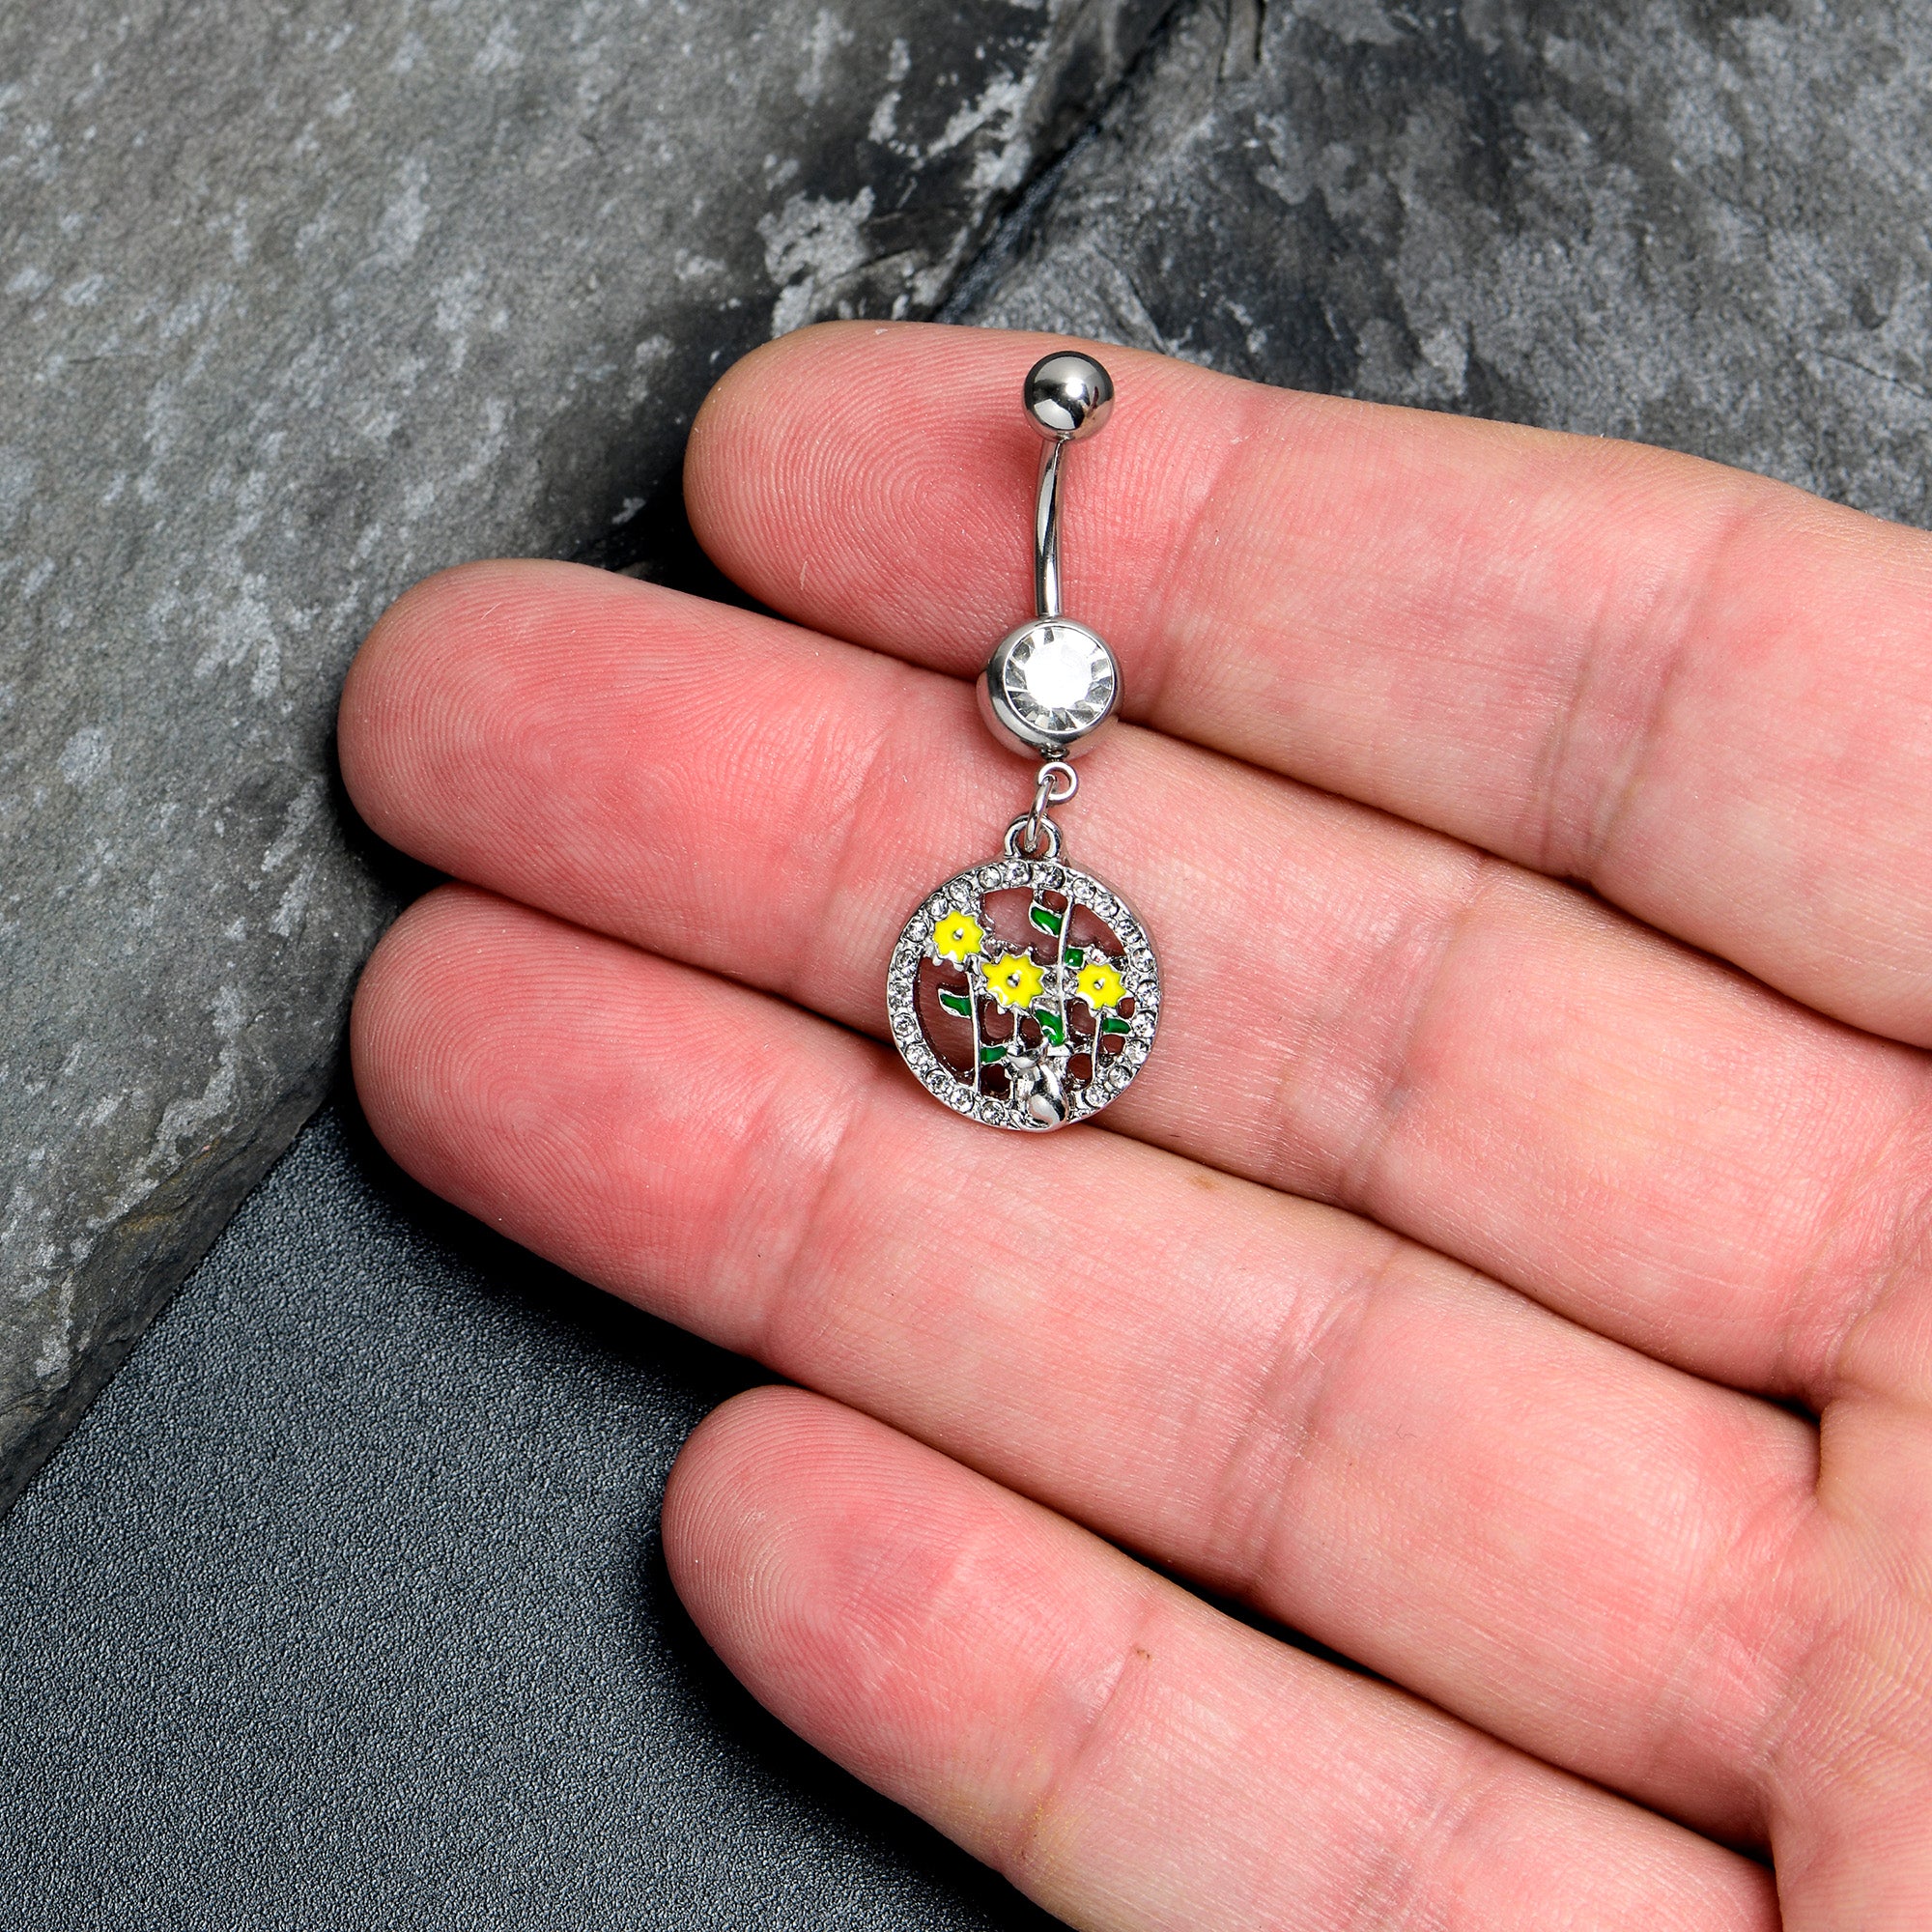 Clear Gem Cat Yellow Flowers Dangle Belly Ring